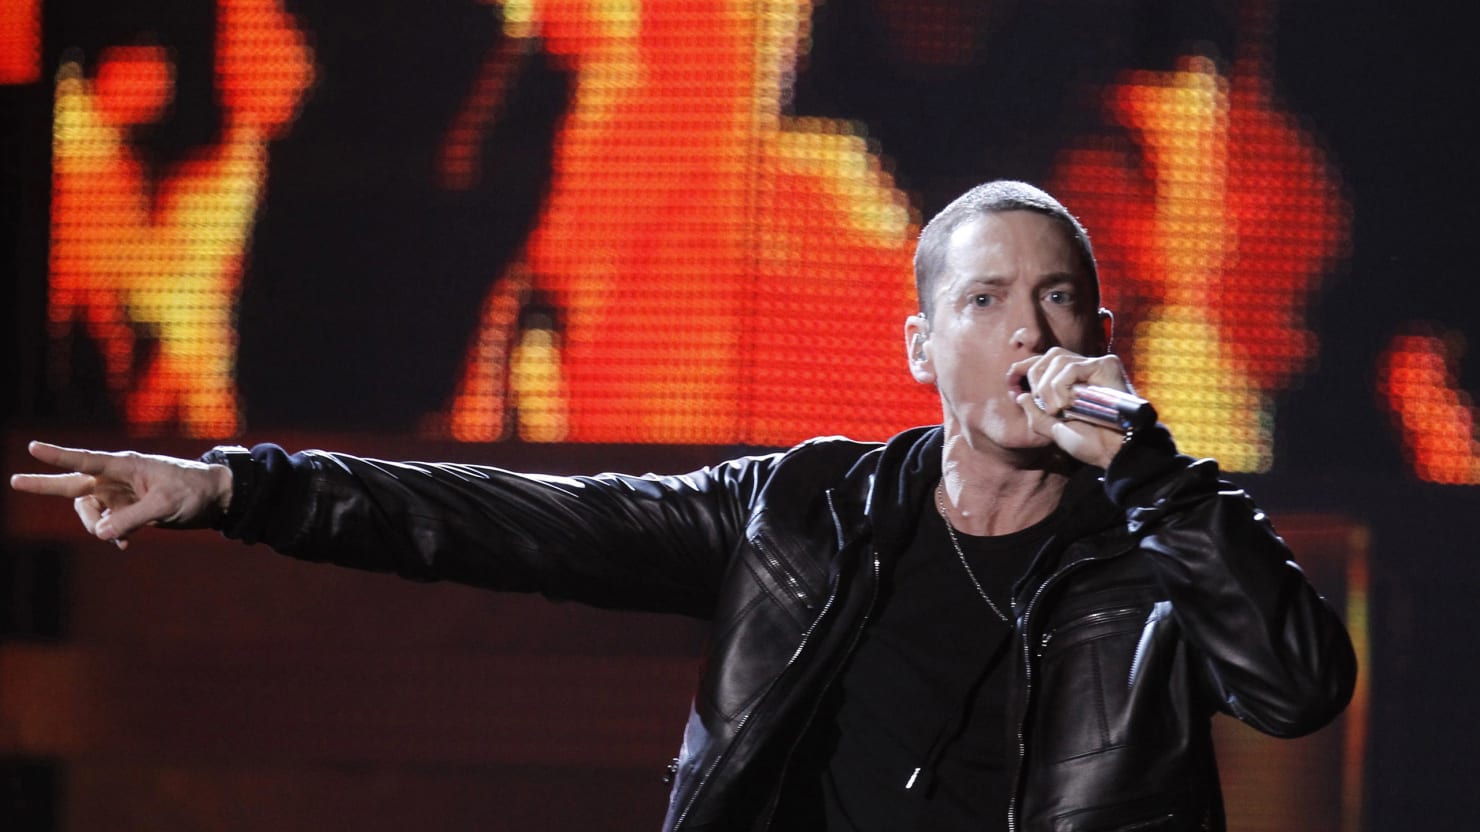 Eminem’s Anti-Trump Freestyle Is as Flaccid as Trump’s Campaign